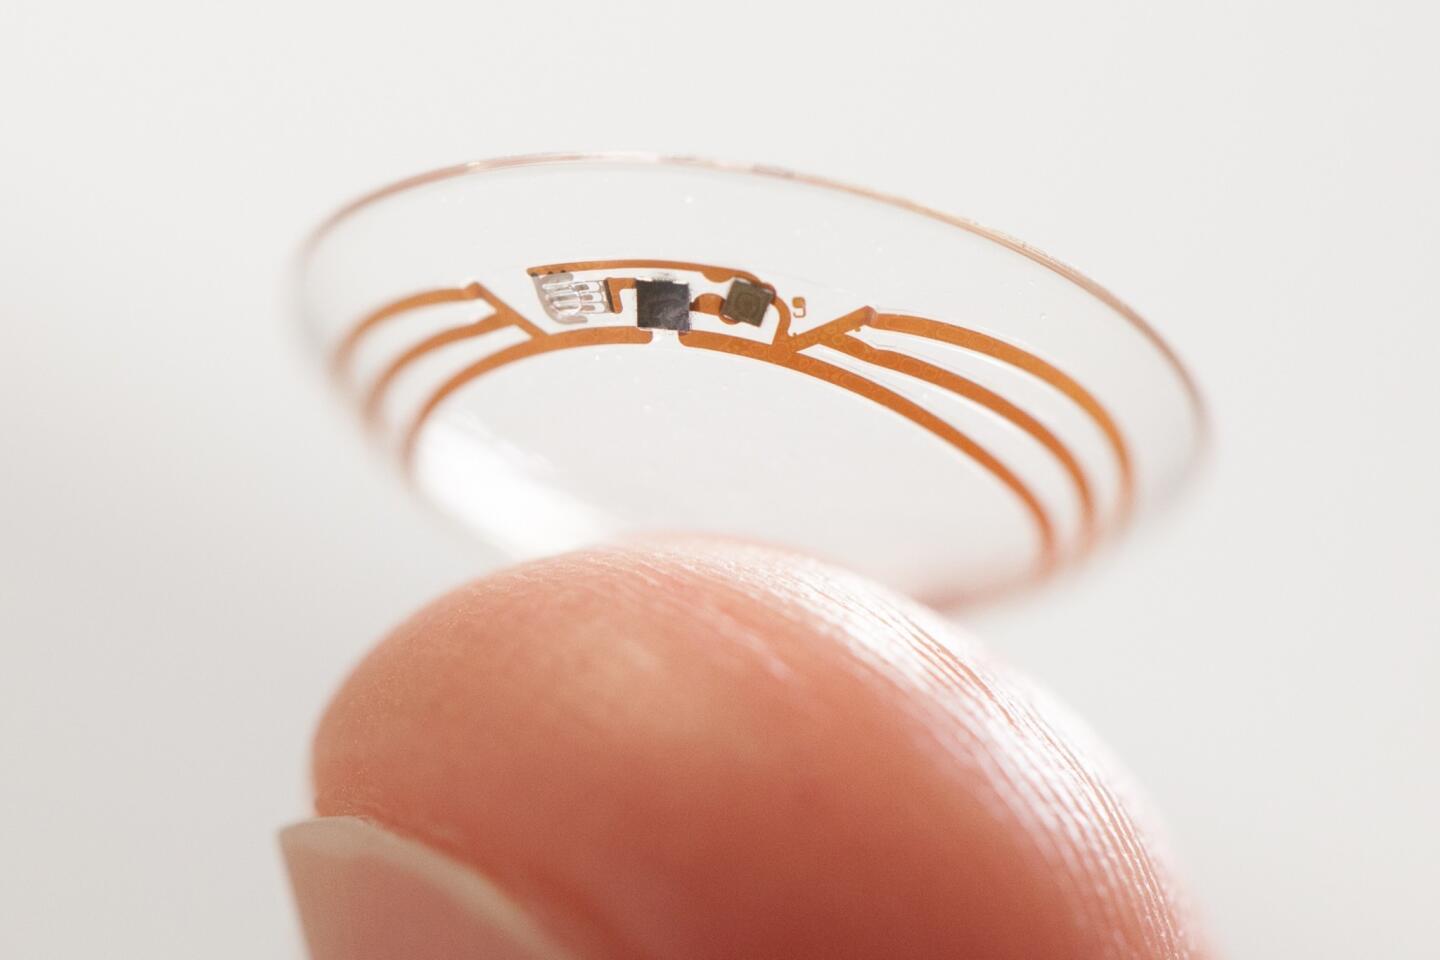 Google applied in April for a patent describing how to fit a camera into a contact lens. This patent is one piece of Google's smart contact lens project, which would create contacts that could monitor glucose levels, enhance users' eyesight and record other data.